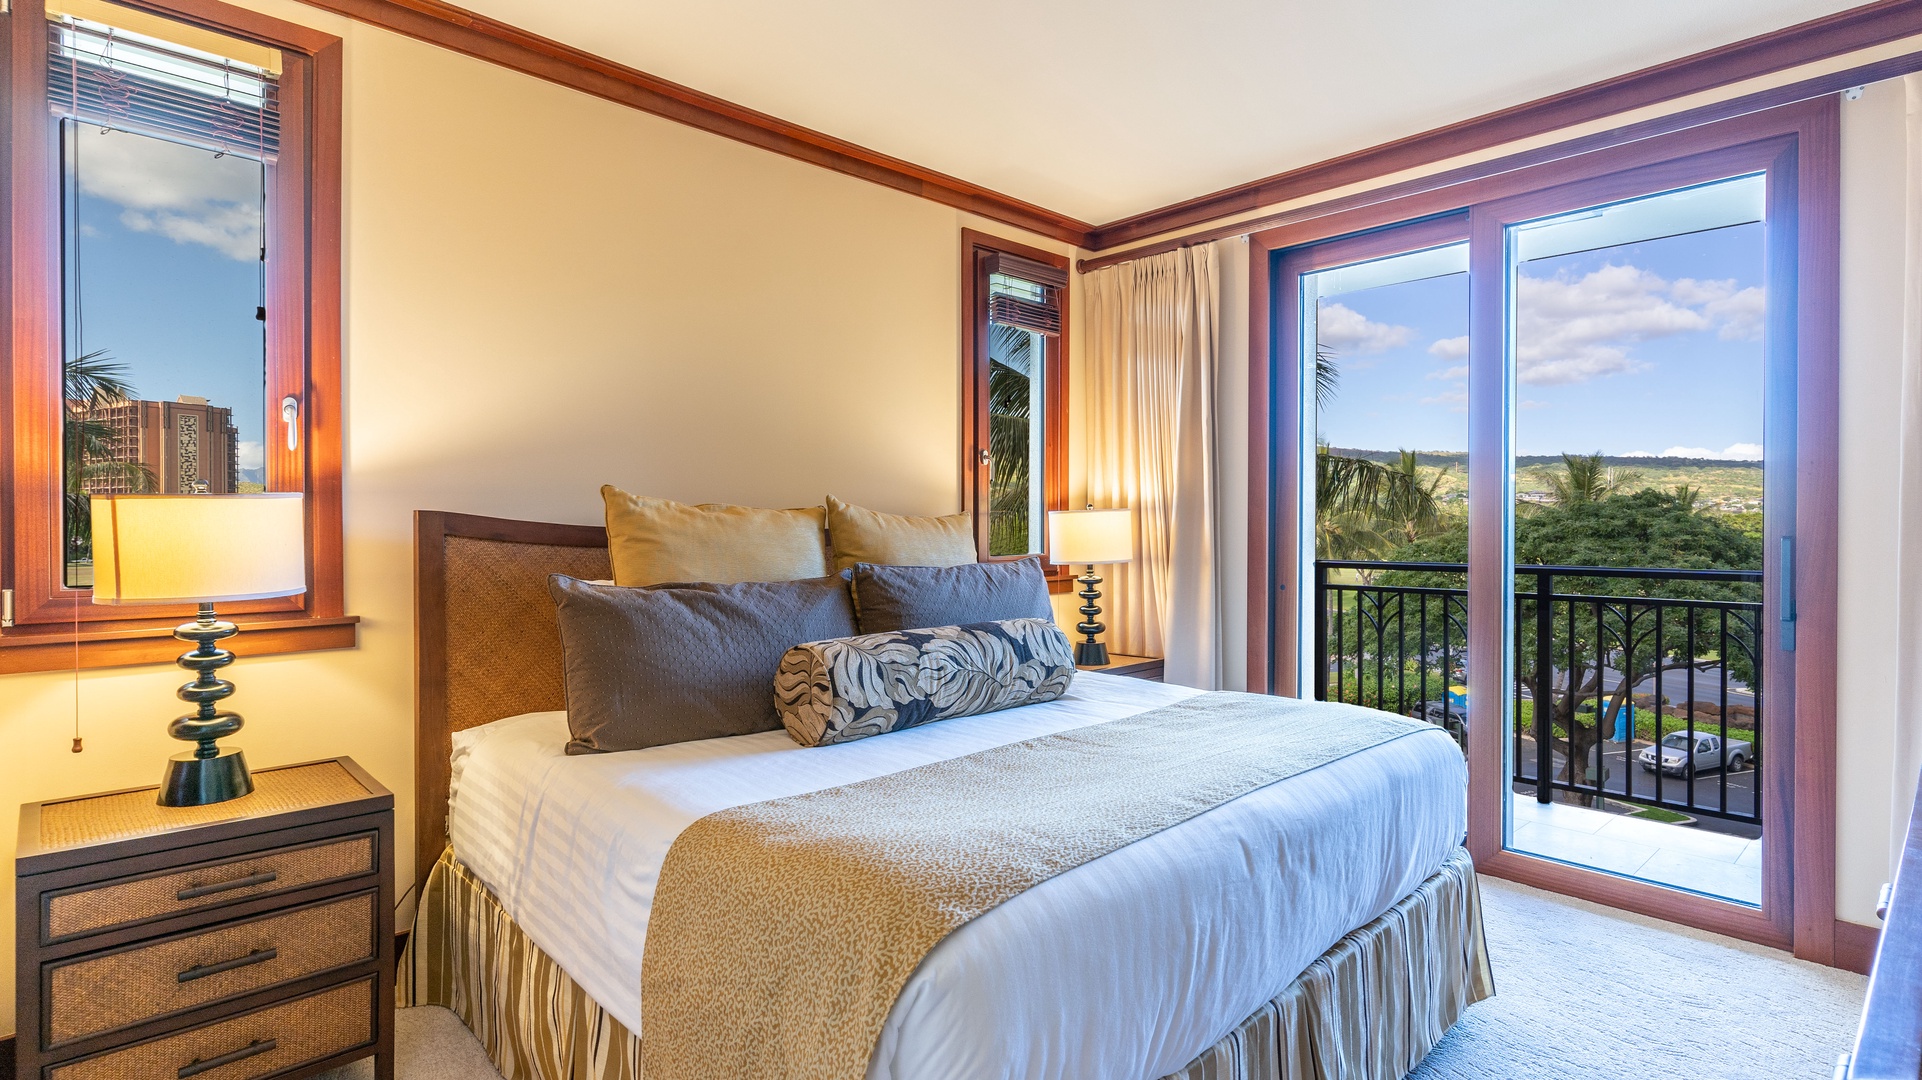 Kapolei Vacation Rentals, Ko Olina Beach Villas O401 - The primary guest bedroom boasts comfort, style and views.